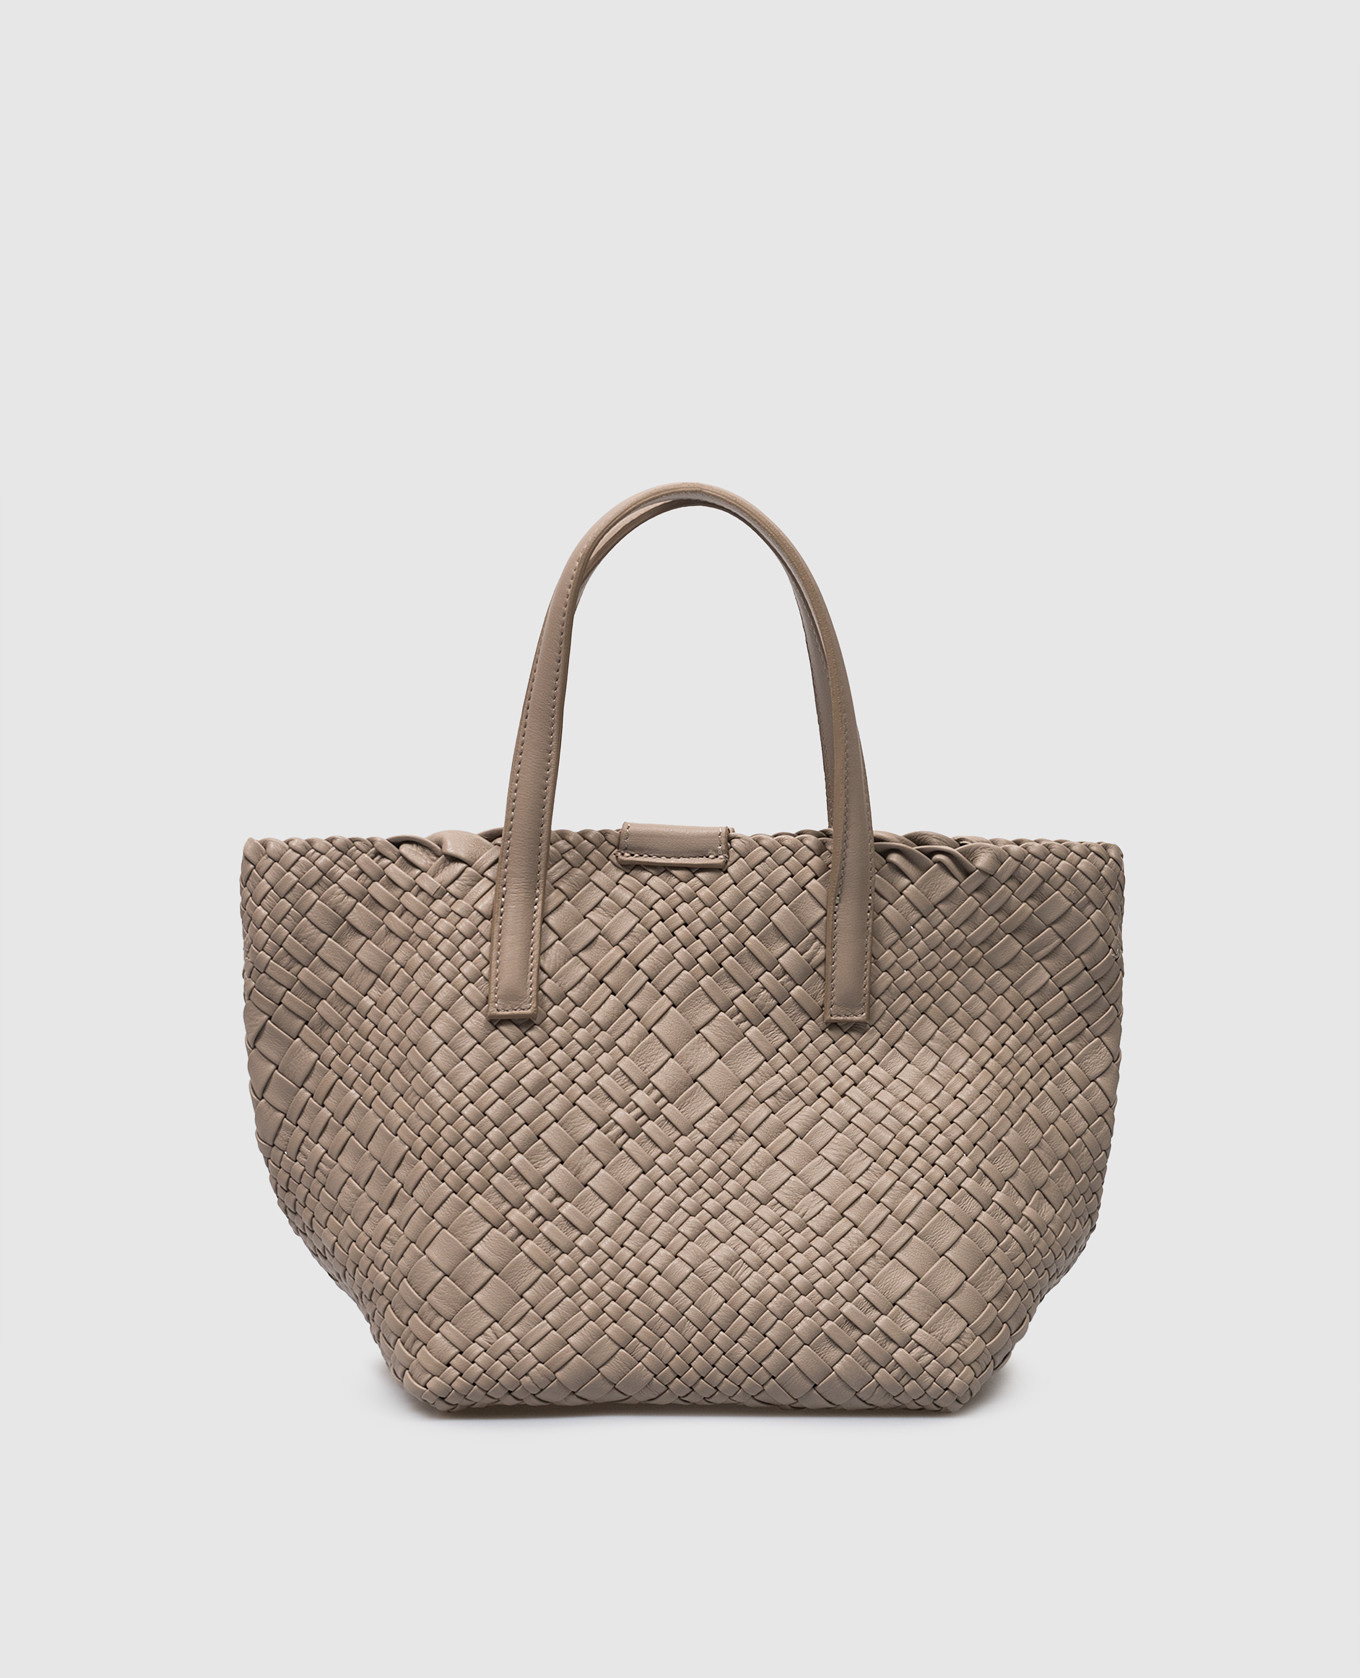 Beige leather woven tote bag